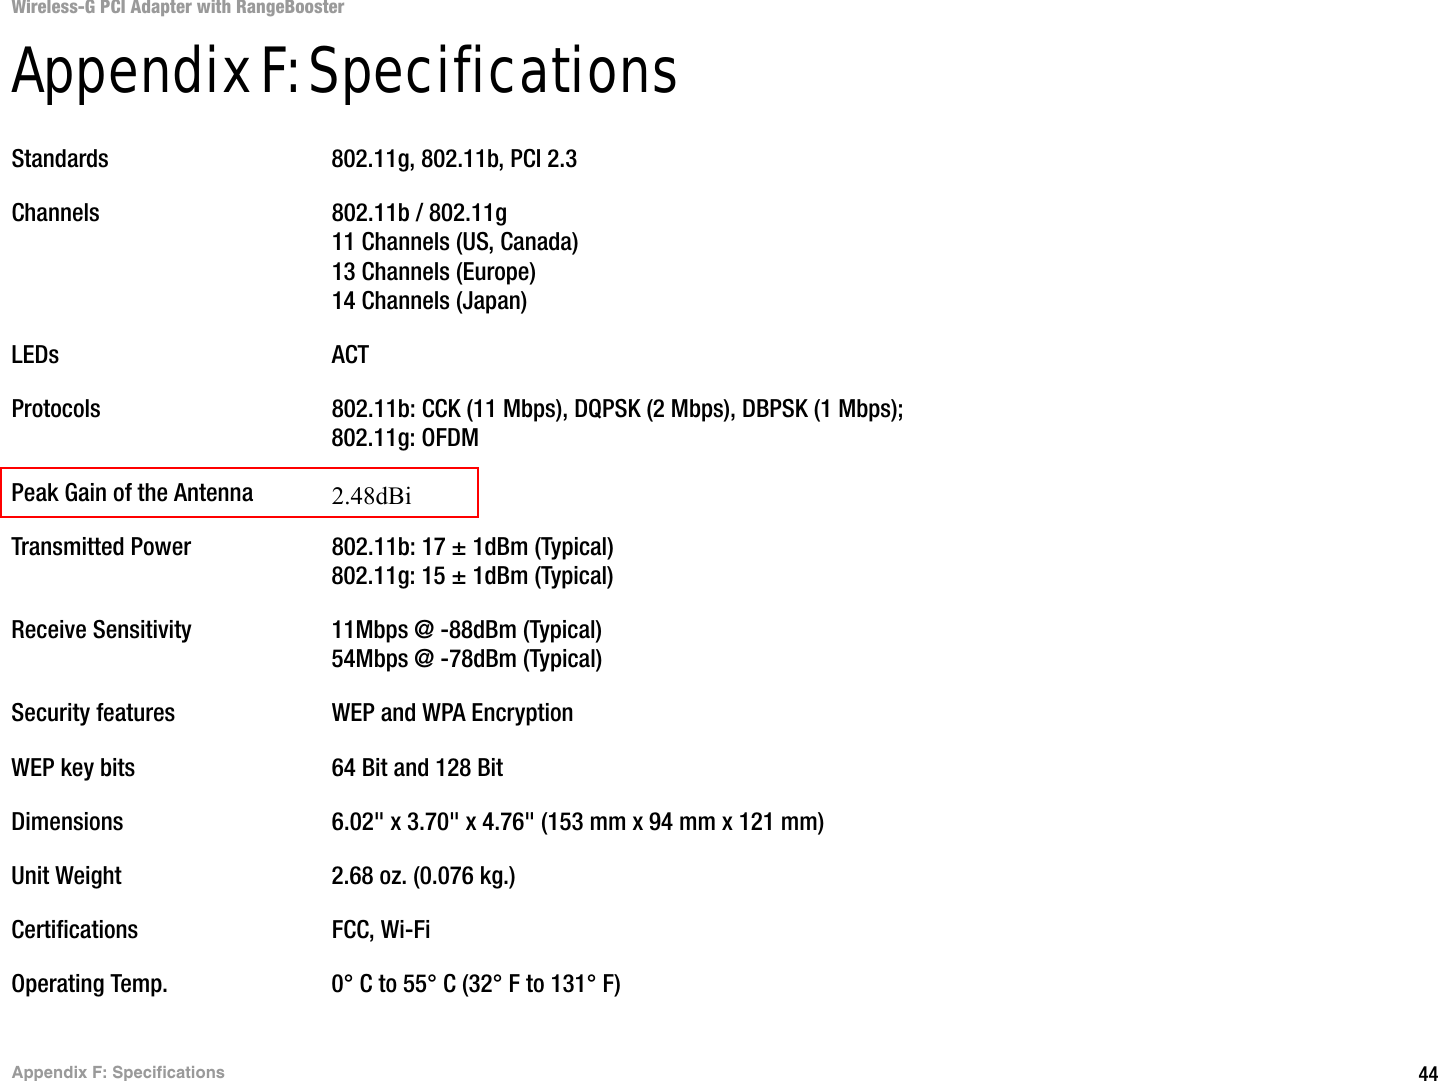 44Appendix F: SpecificationsWireless-G PCI Adapter with RangeBoosterAppendix F: SpecificationsStandards 802.11g, 802.11b, PCI 2.3Channels 802.11b / 802.11g11 Channels (US, Canada)13 Channels (Europe)14 Channels (Japan)LEDs ACTProtocols 802.11b: CCK (11 Mbps), DQPSK (2 Mbps), DBPSK (1 Mbps); 802.11g: OFDMPeak Gain of the Antenna 2dBiTransmitted Power 802.11b: 17 ± 1dBm (Typical)802.11g: 15 ± 1dBm (Typical)Receive Sensitivity 11Mbps @ -88dBm (Typical)54Mbps @ -78dBm (Typical)Security features WEP and WPA EncryptionWEP key bits 64 Bit and 128 BitDimensions  6.02&quot; x 3.70&quot; x 4.76&quot; (153 mm x 94 mm x 121 mm)Unit Weight 2.68 oz. (0.076 kg.)Certifications FCC, Wi-FiOperating Temp. 0° C to 55° C (32° F to 131° F)2.48dBi